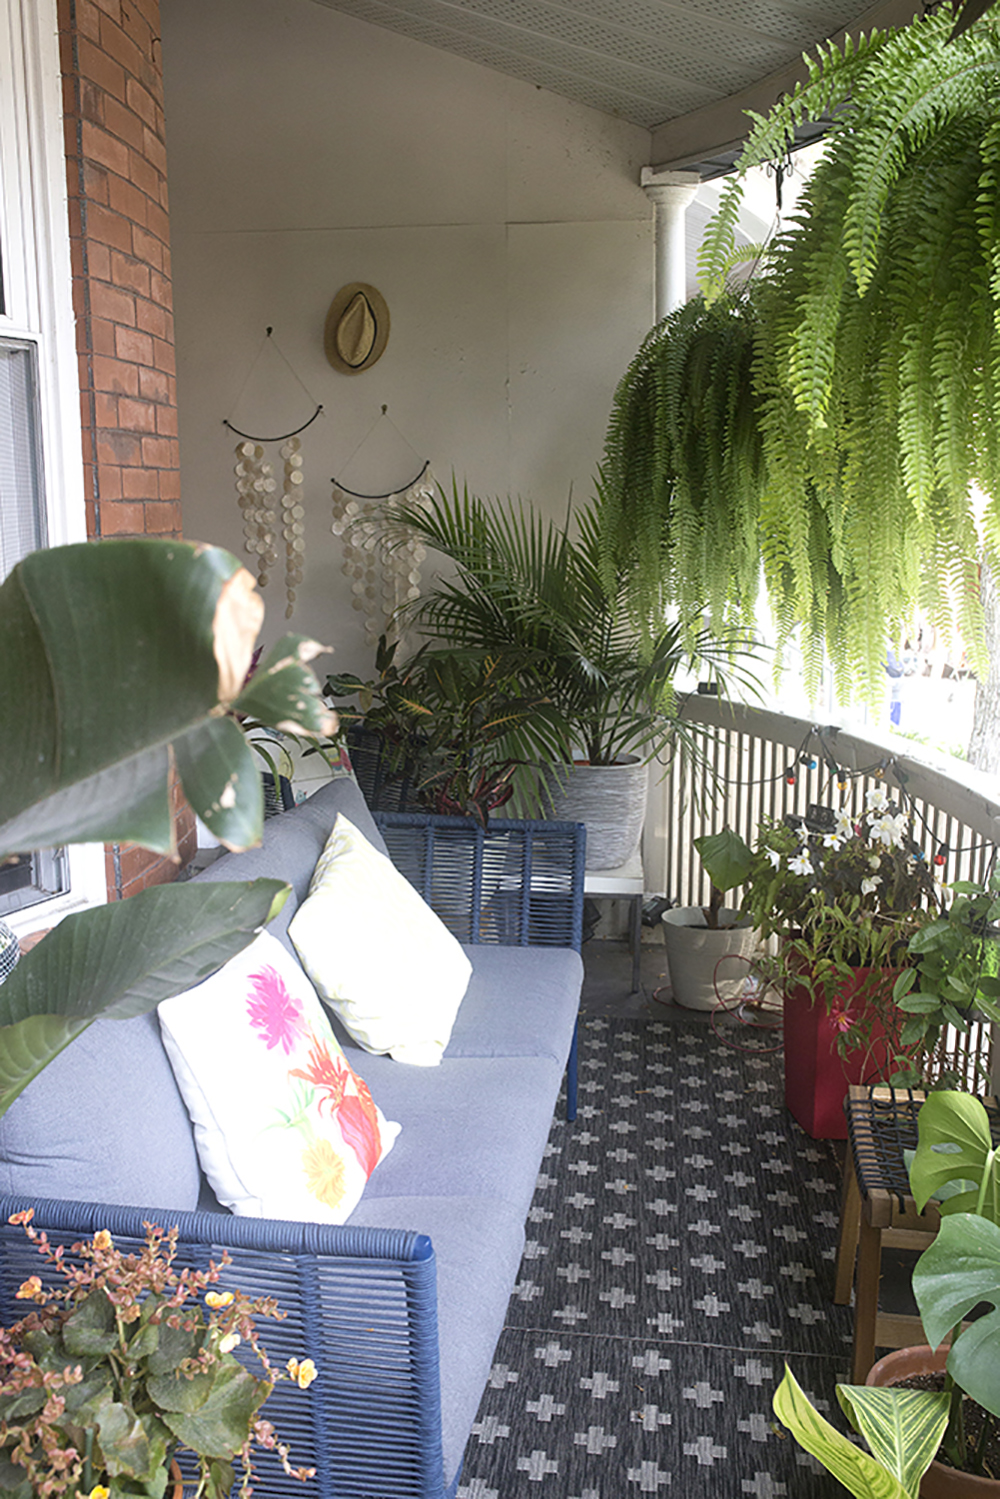 A balcony with many plants around. Hanging from the ceiling are two large ferns.